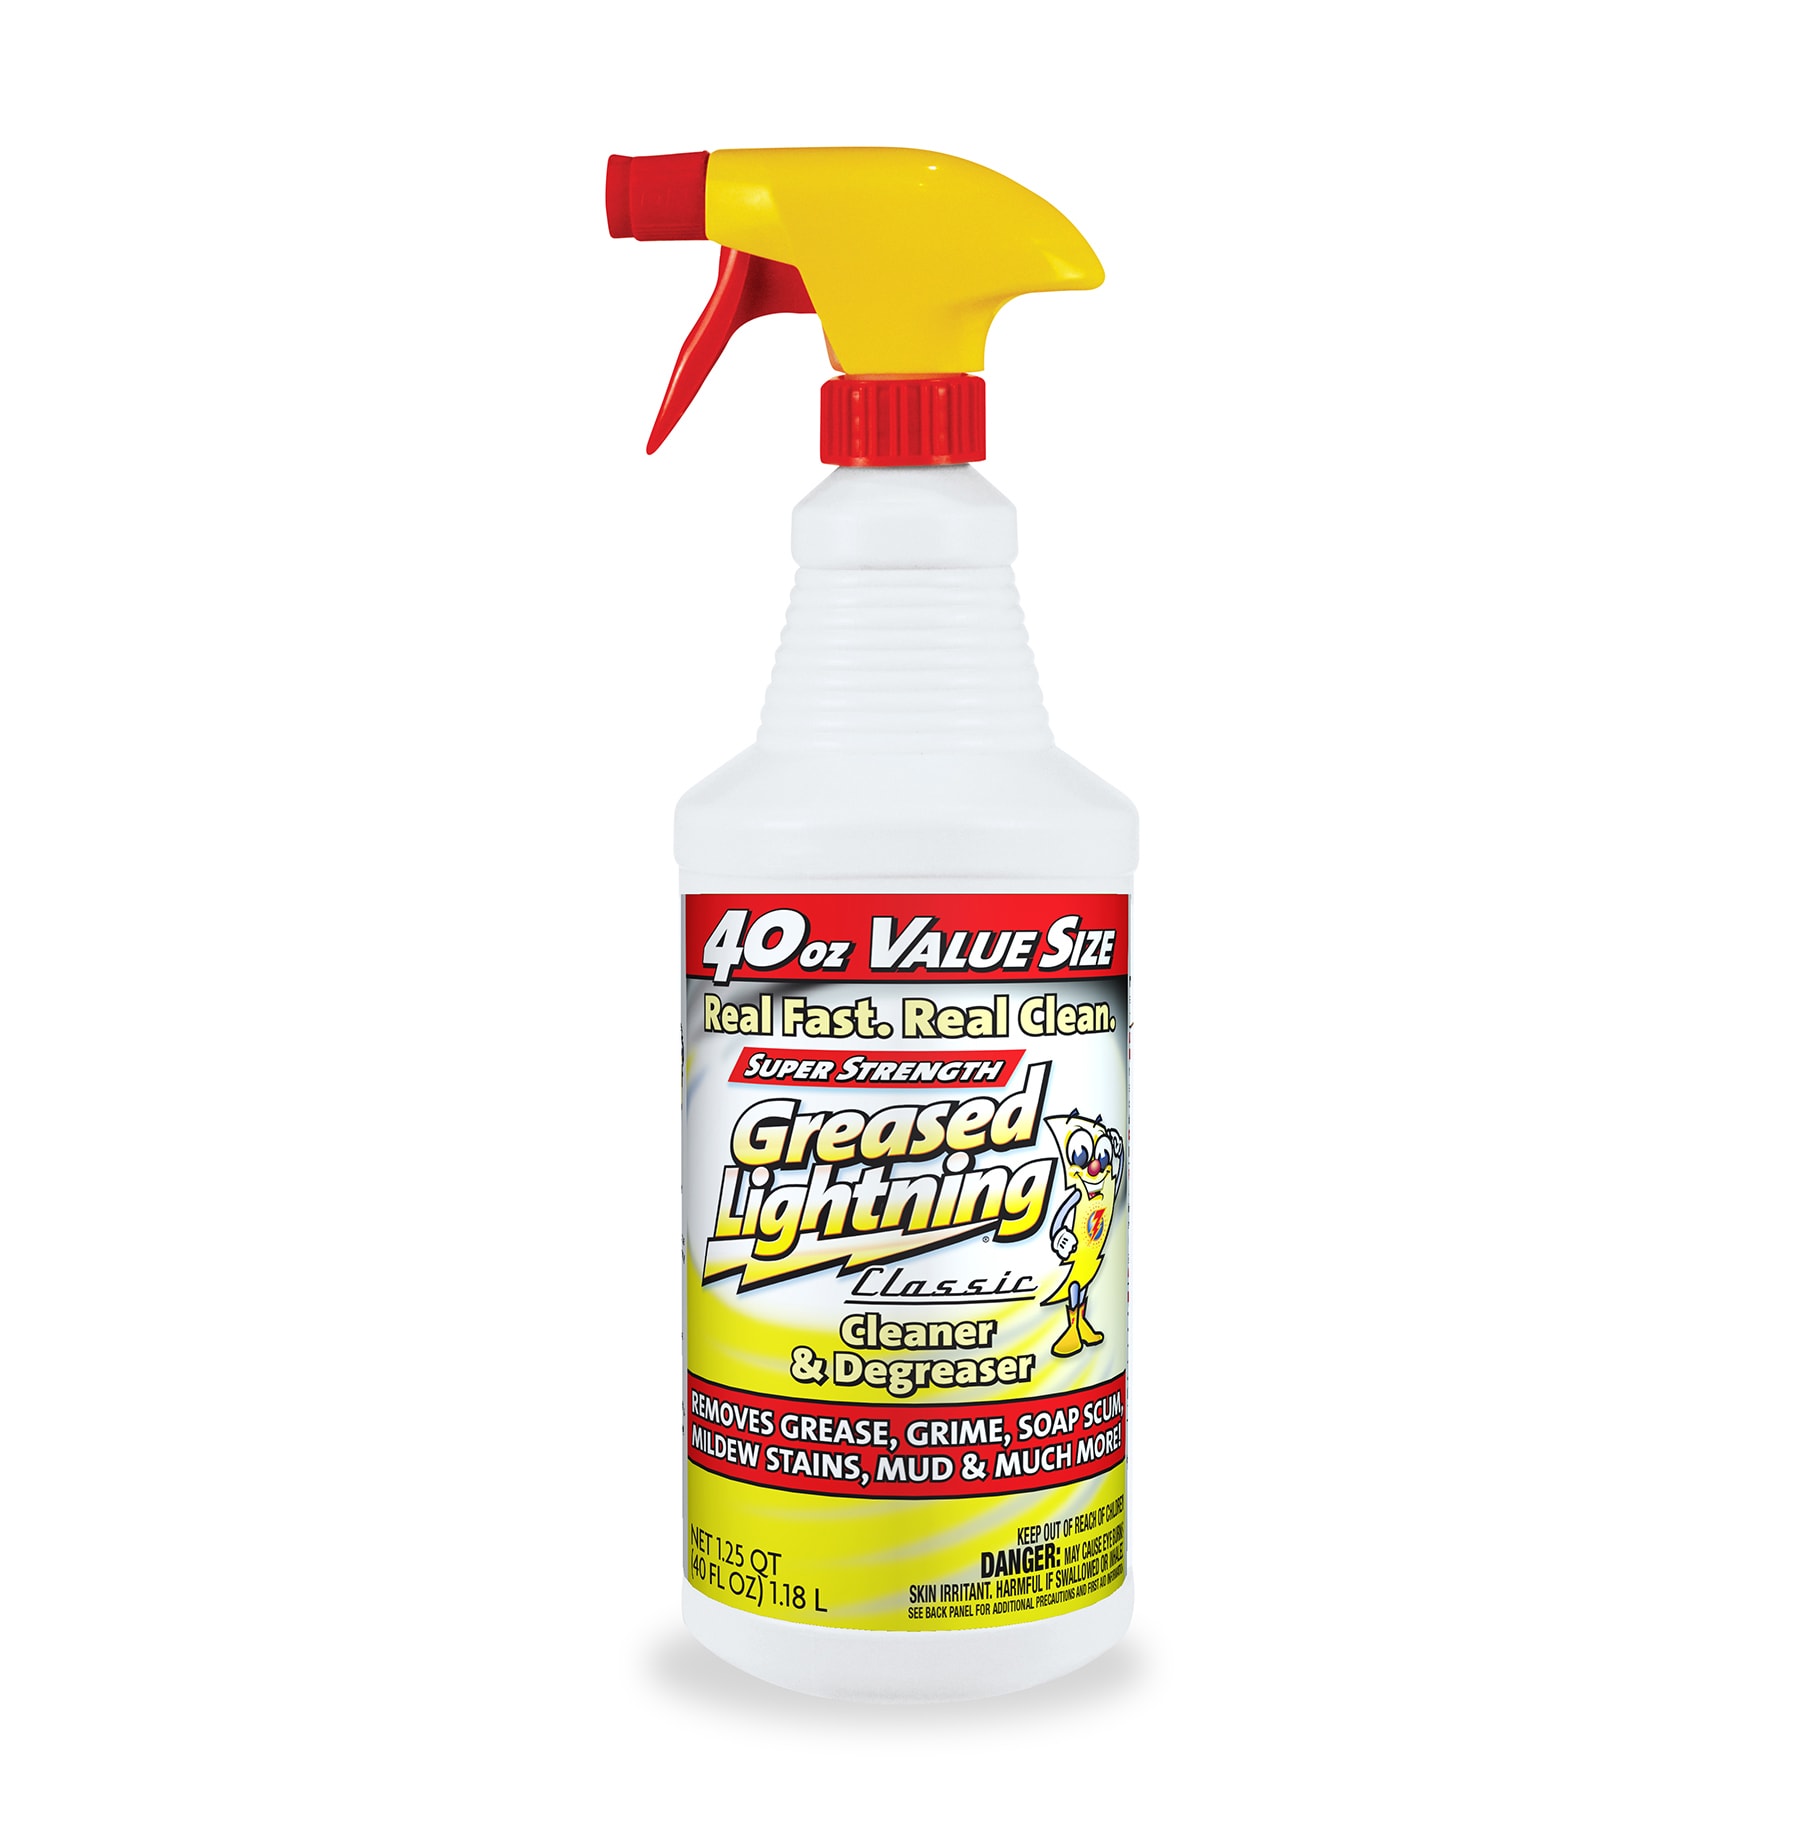 Superclean 101723 Cleaner and Degreaser, 1 gal, Liquid, C